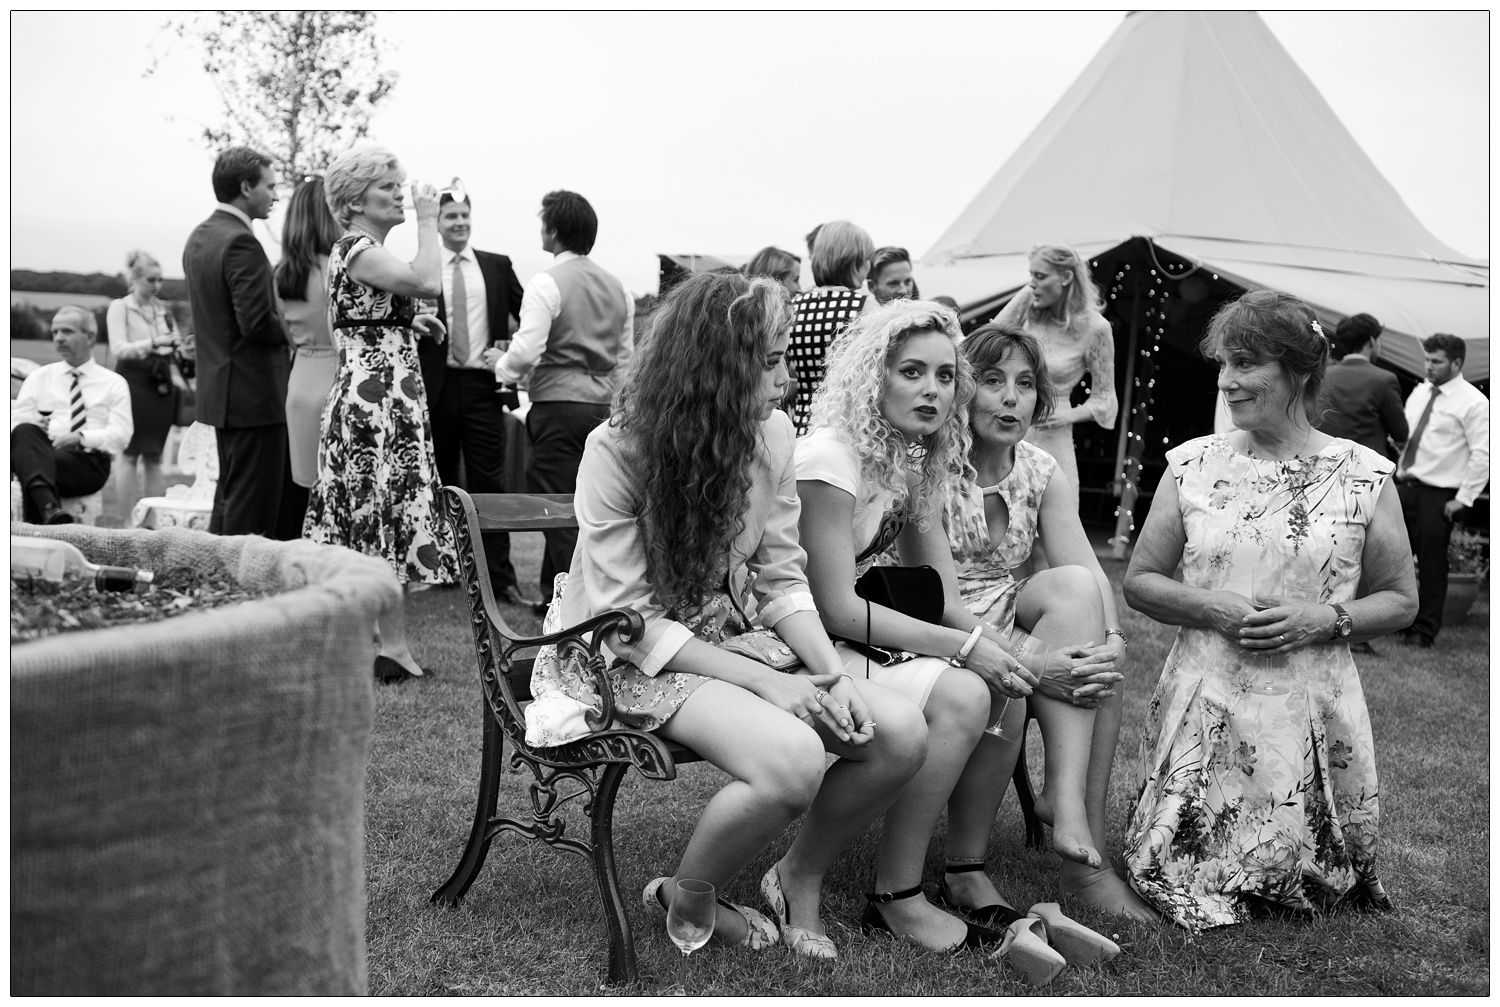 Three women on a bench, one woman kneeling on the grass at a wedding. ONe woman has taken her shoes off. There is a Tentipi behind them.